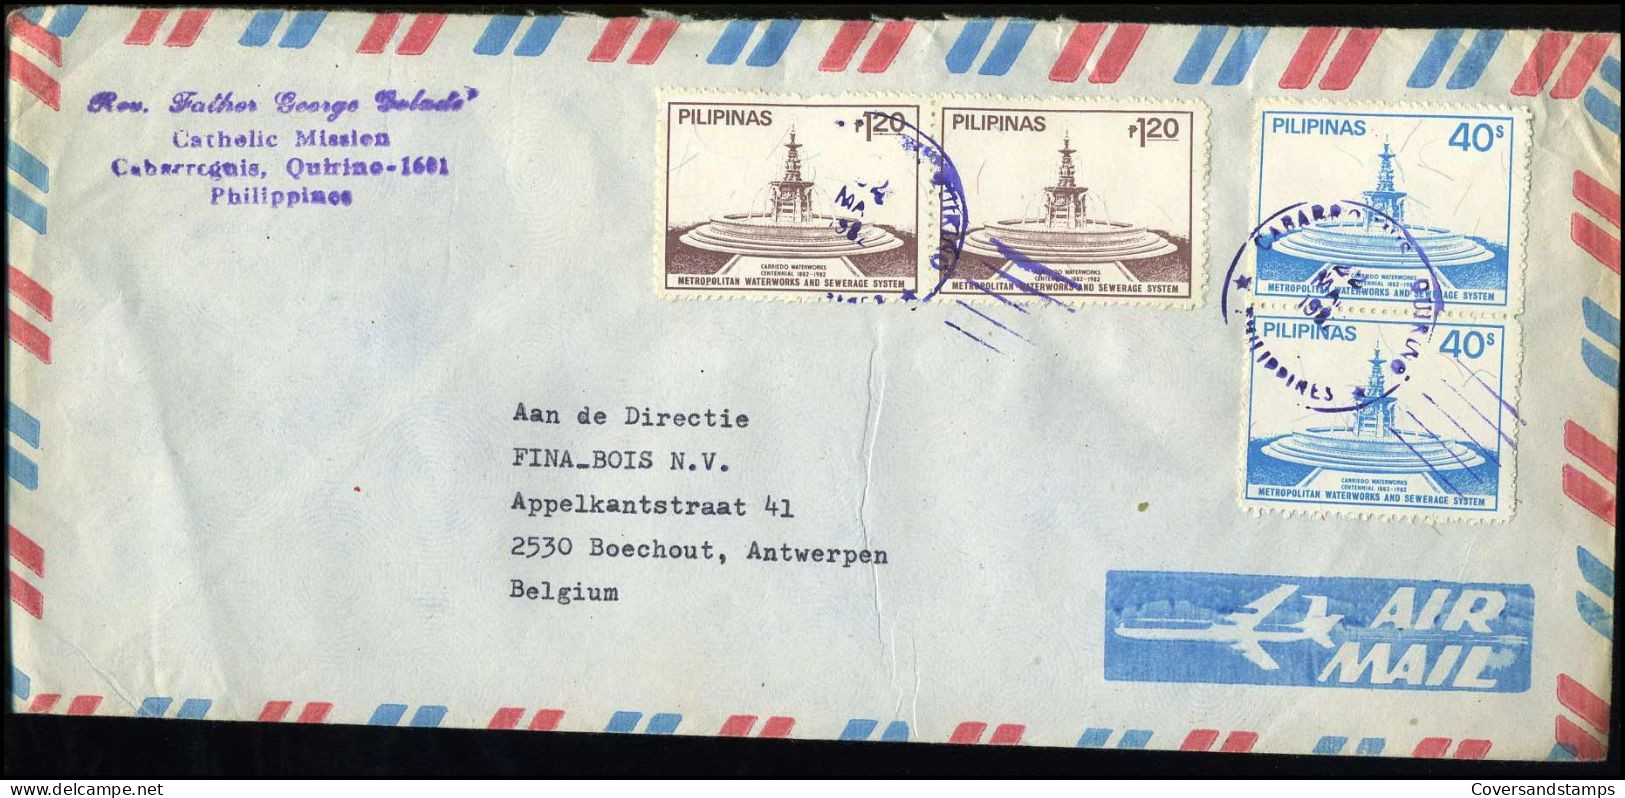 Cover To Antwerp, Belgium - "Rev. Father George  ... Catholic Mission" - Philippines